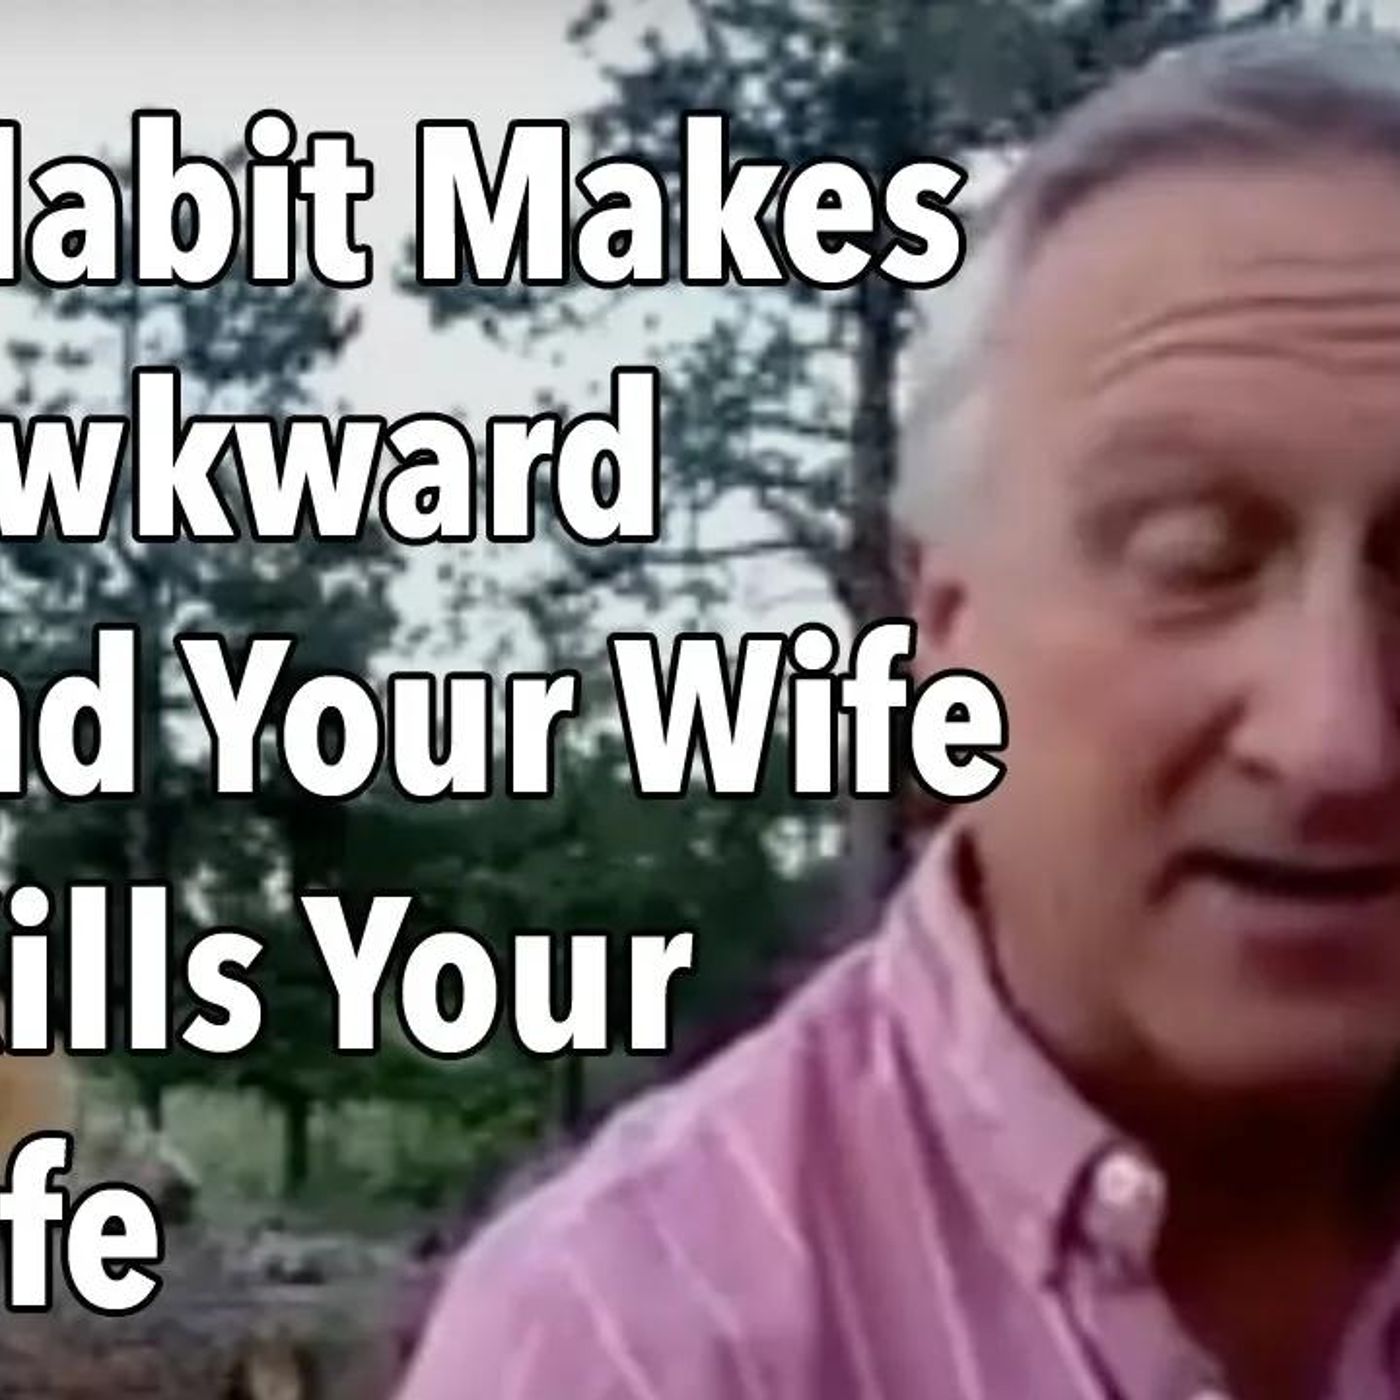 This Habit Makes You Awkward Around Your Wife and Kills Your Sex Life